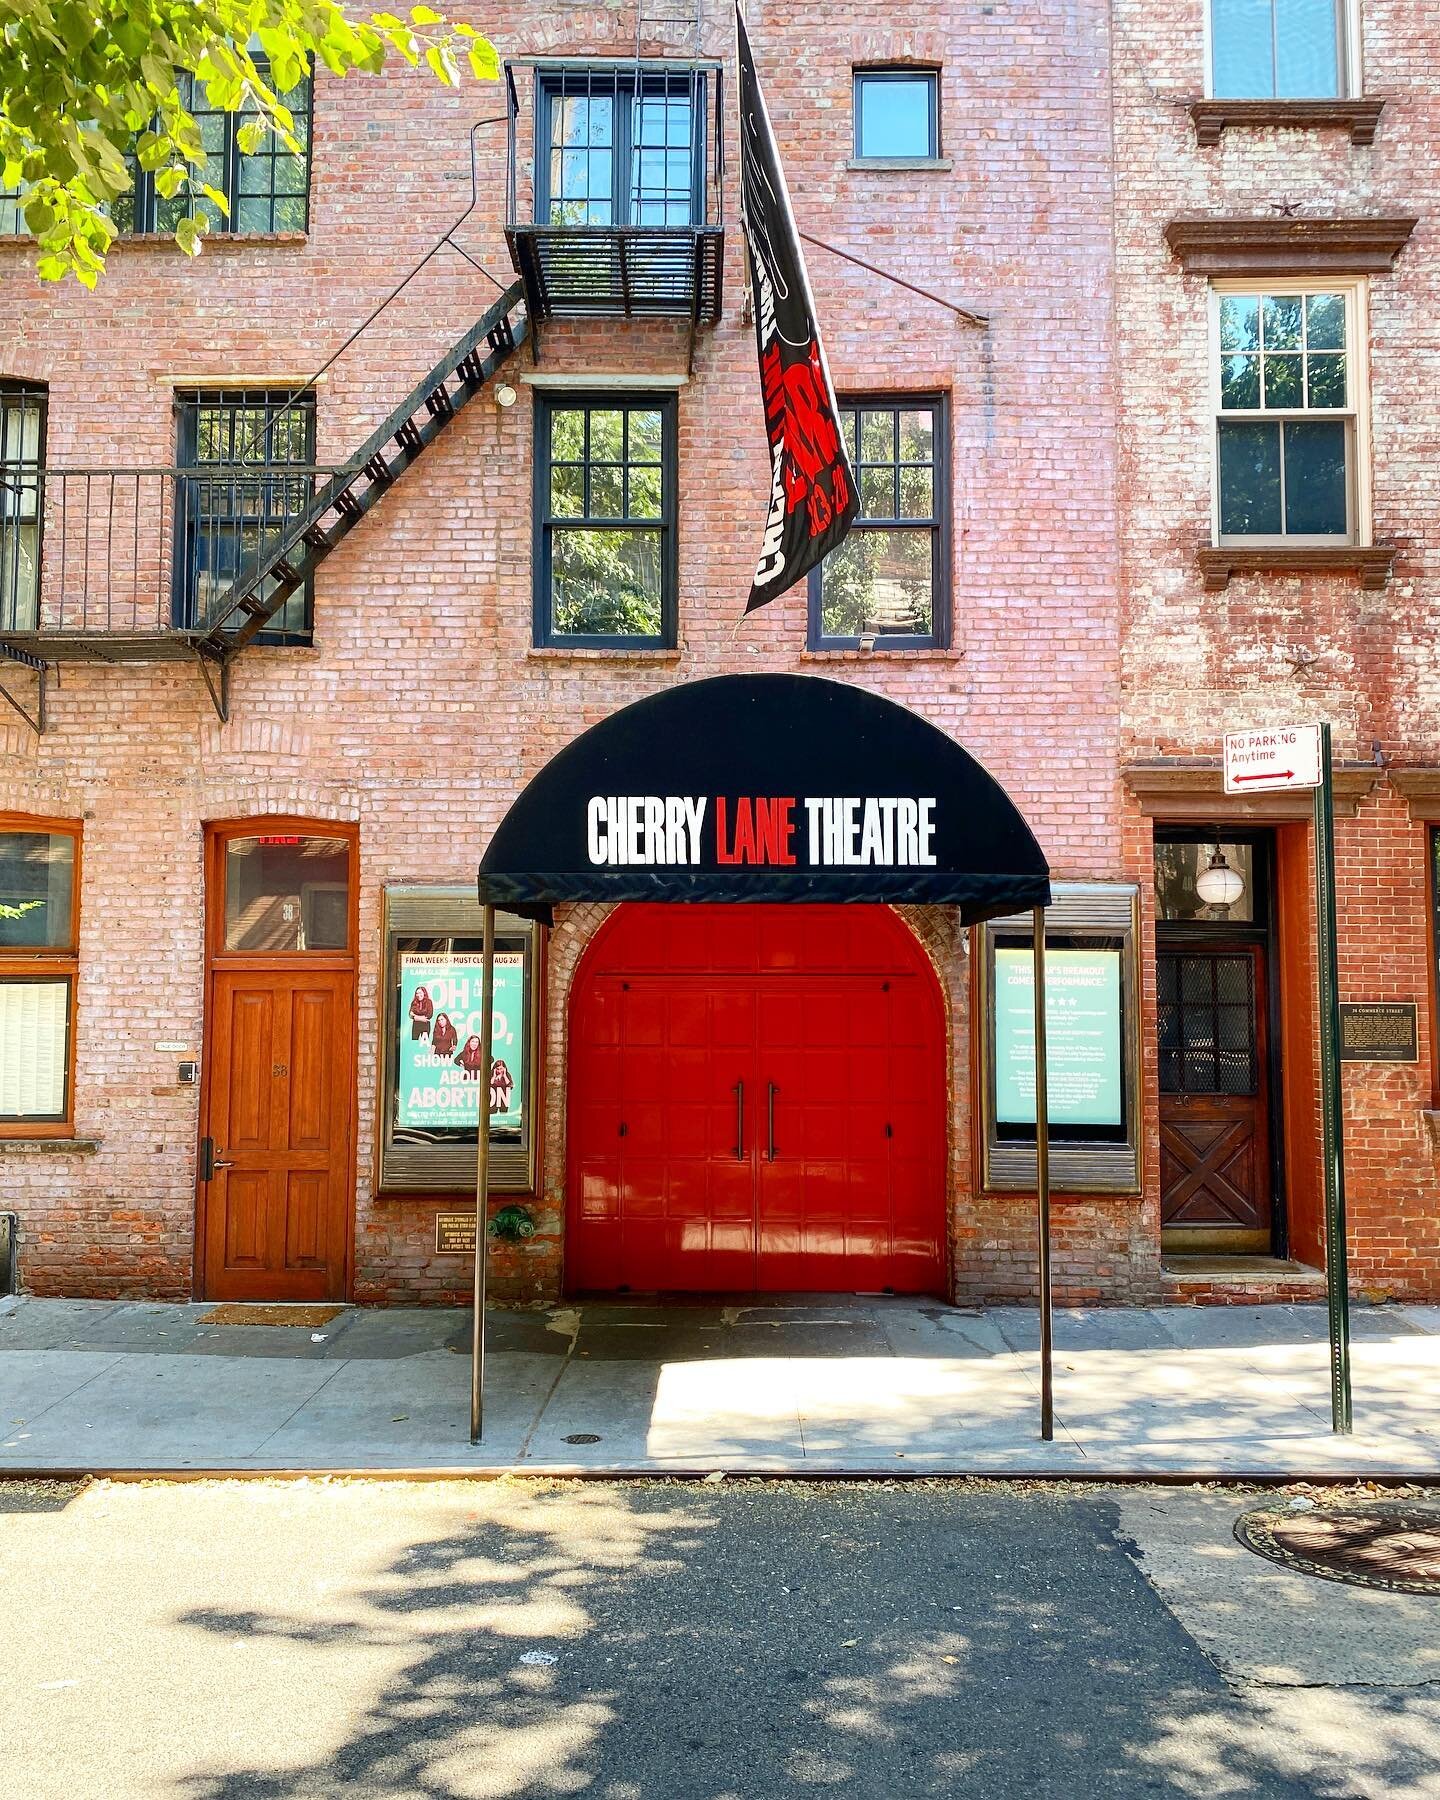 One of the first times I ever performed on stage was at the iconic @cherrylanetheatre  when I was 14.  I had walked by it my entire life never fully understanding it&rsquo;s history and importance in the Off-Broadway world.  Then I stood up there&hel